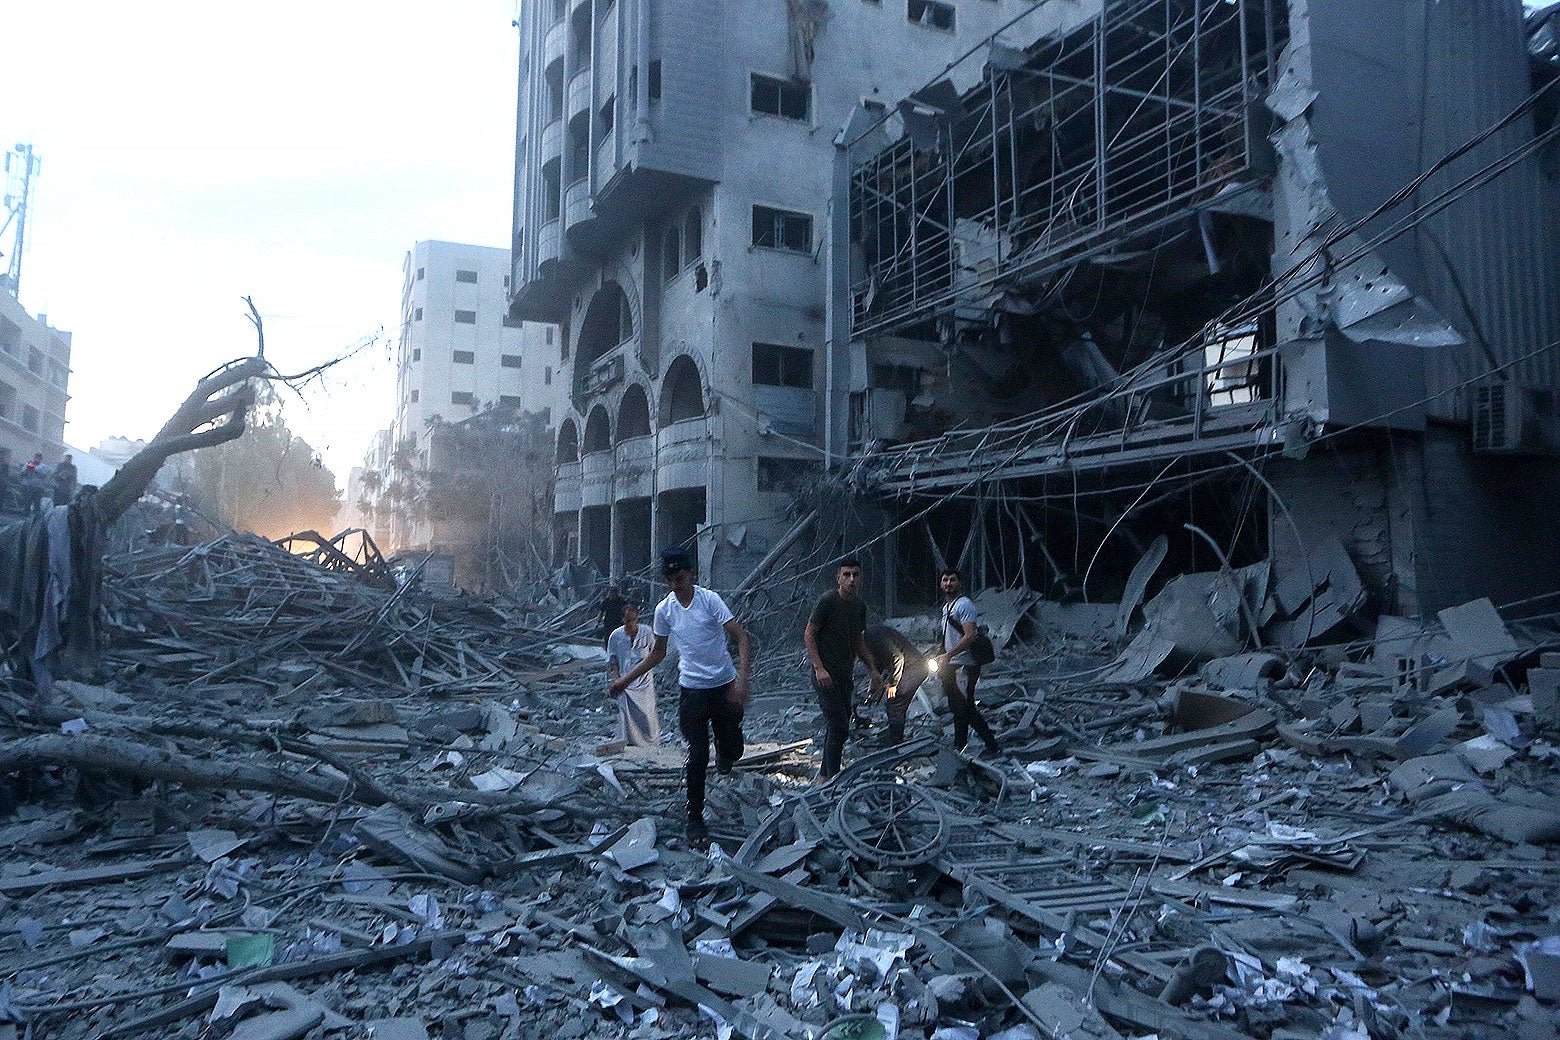 A group of four Palestinians step across rubble. Behind them is a bombed-out building and a tree that has been flipped upside-down.